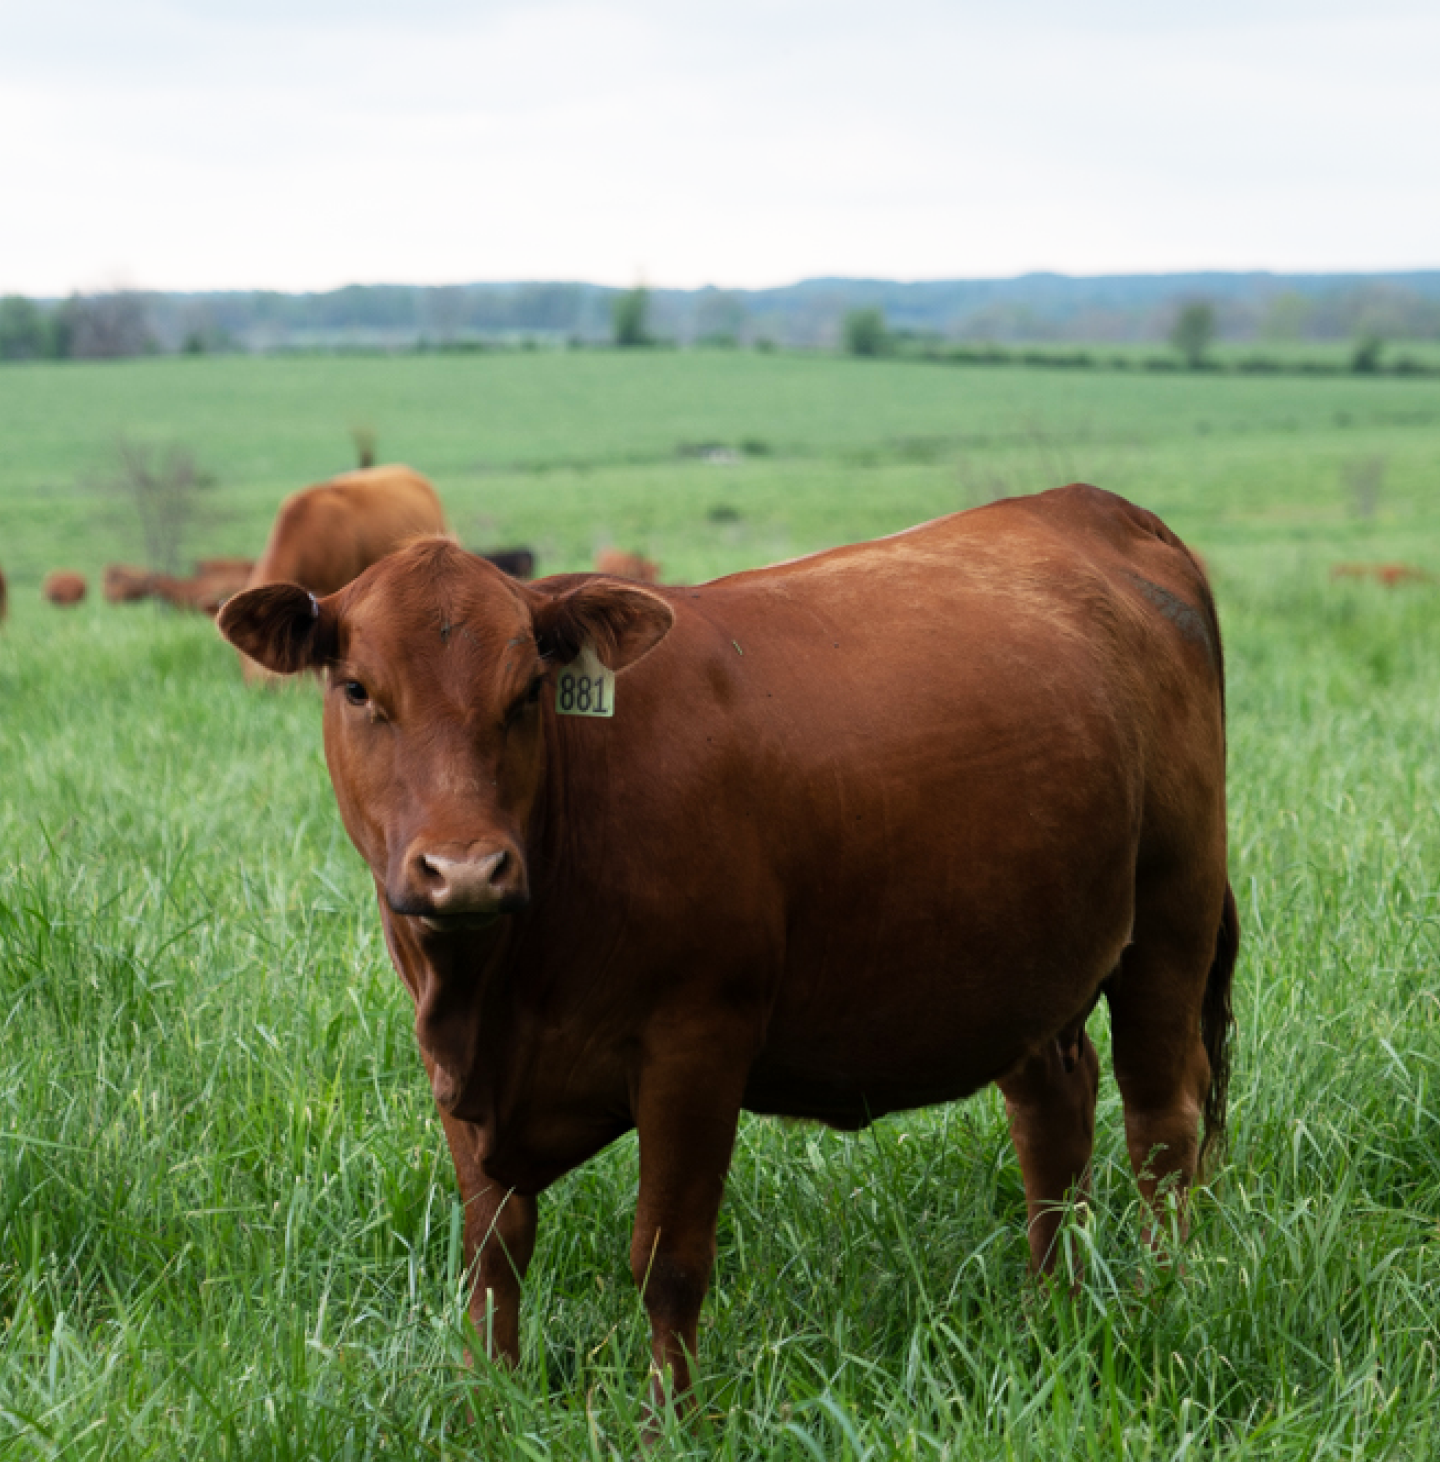 Brown cow with yellow tag on its ear standing in field of tall green grass looking at camera.